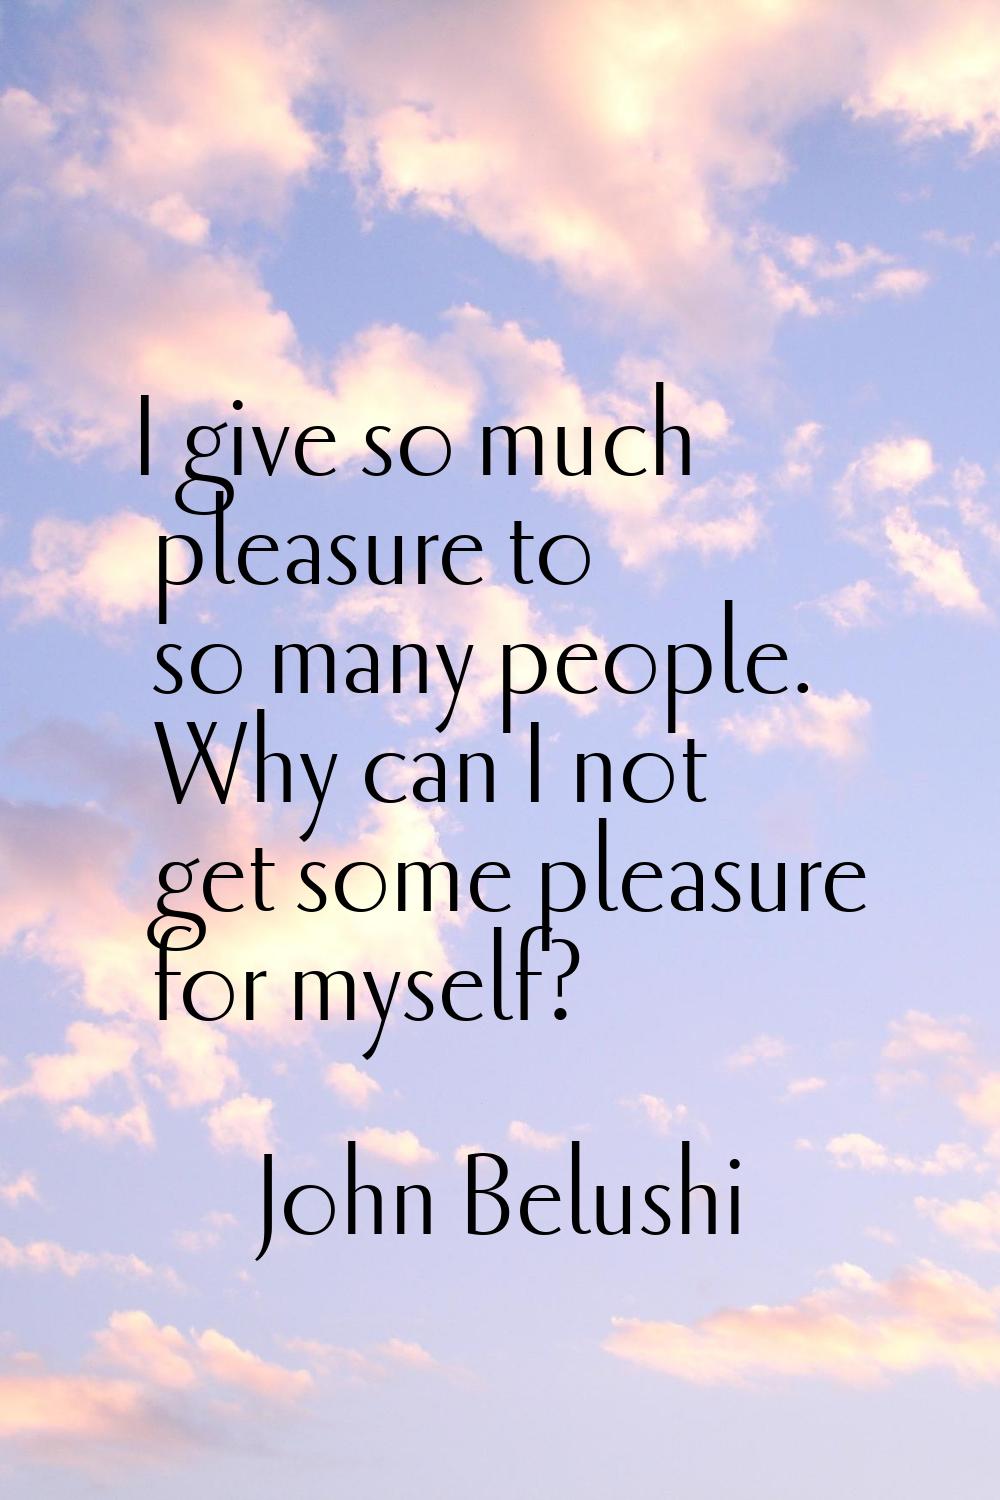 I give so much pleasure to so many people. Why can I not get some pleasure for myself?